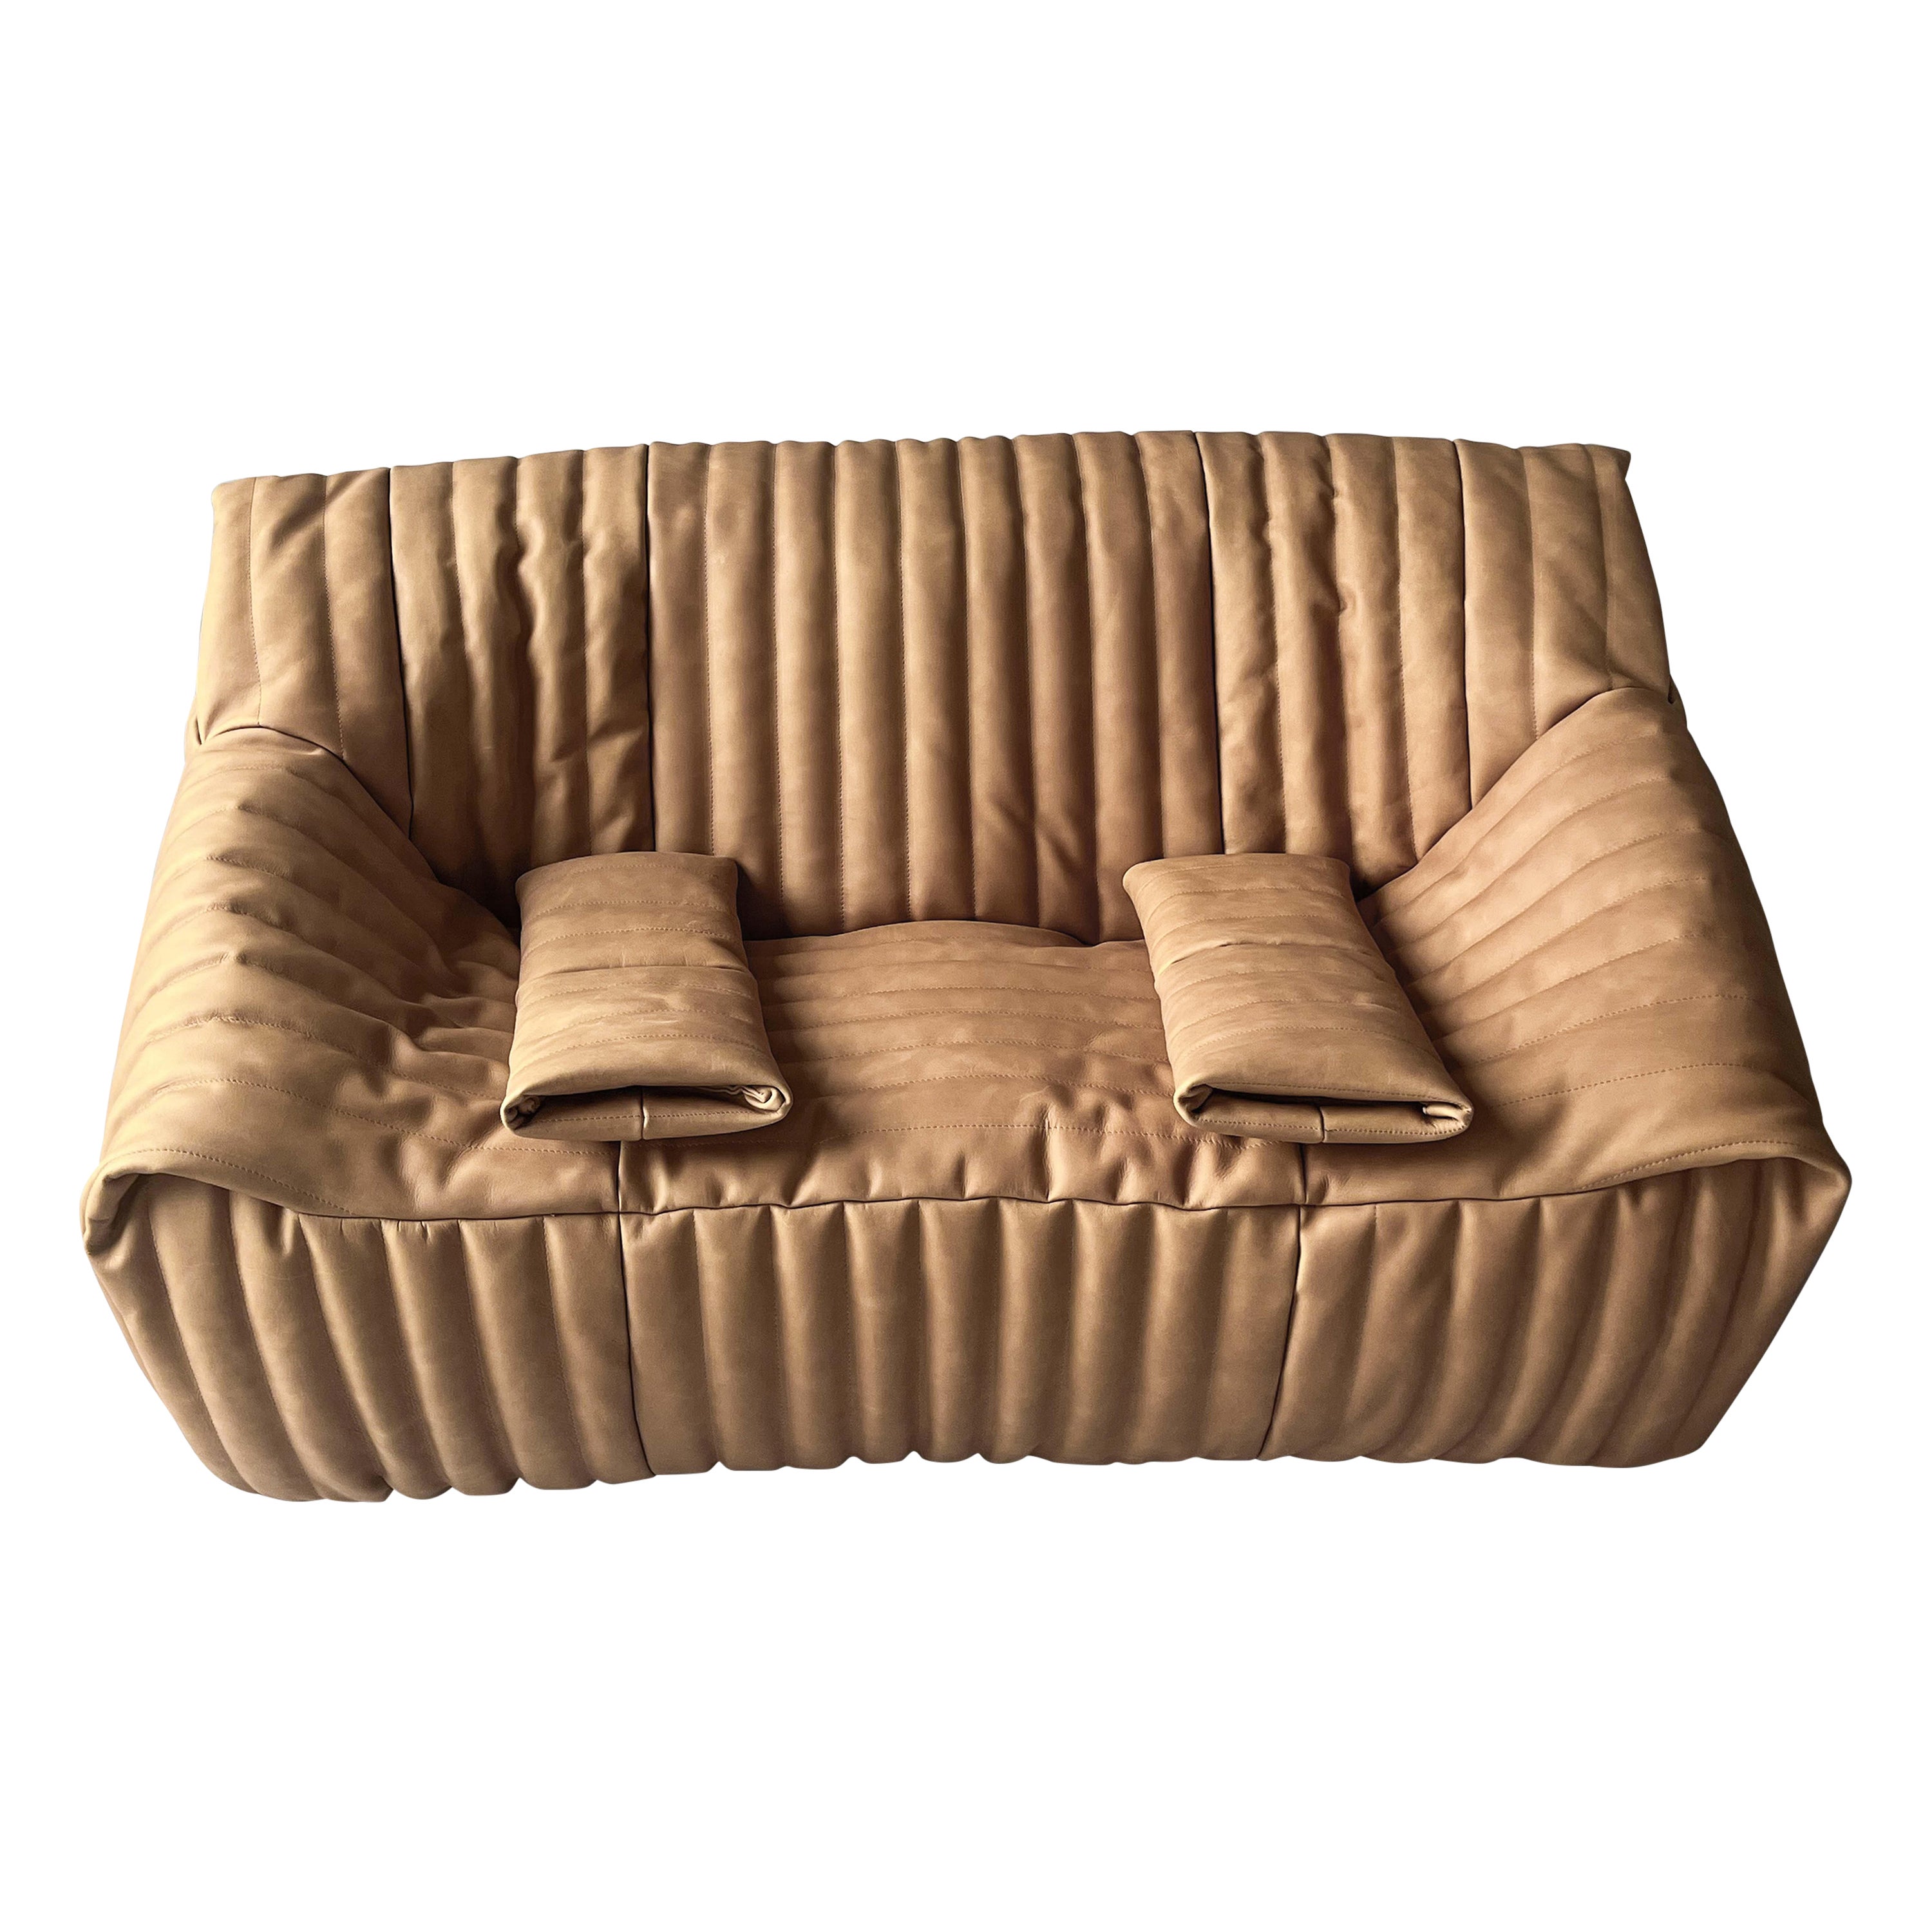  Sandra sofa  designed by Annie Hiéronimus for Cinna after she joined the Roset  For Sale